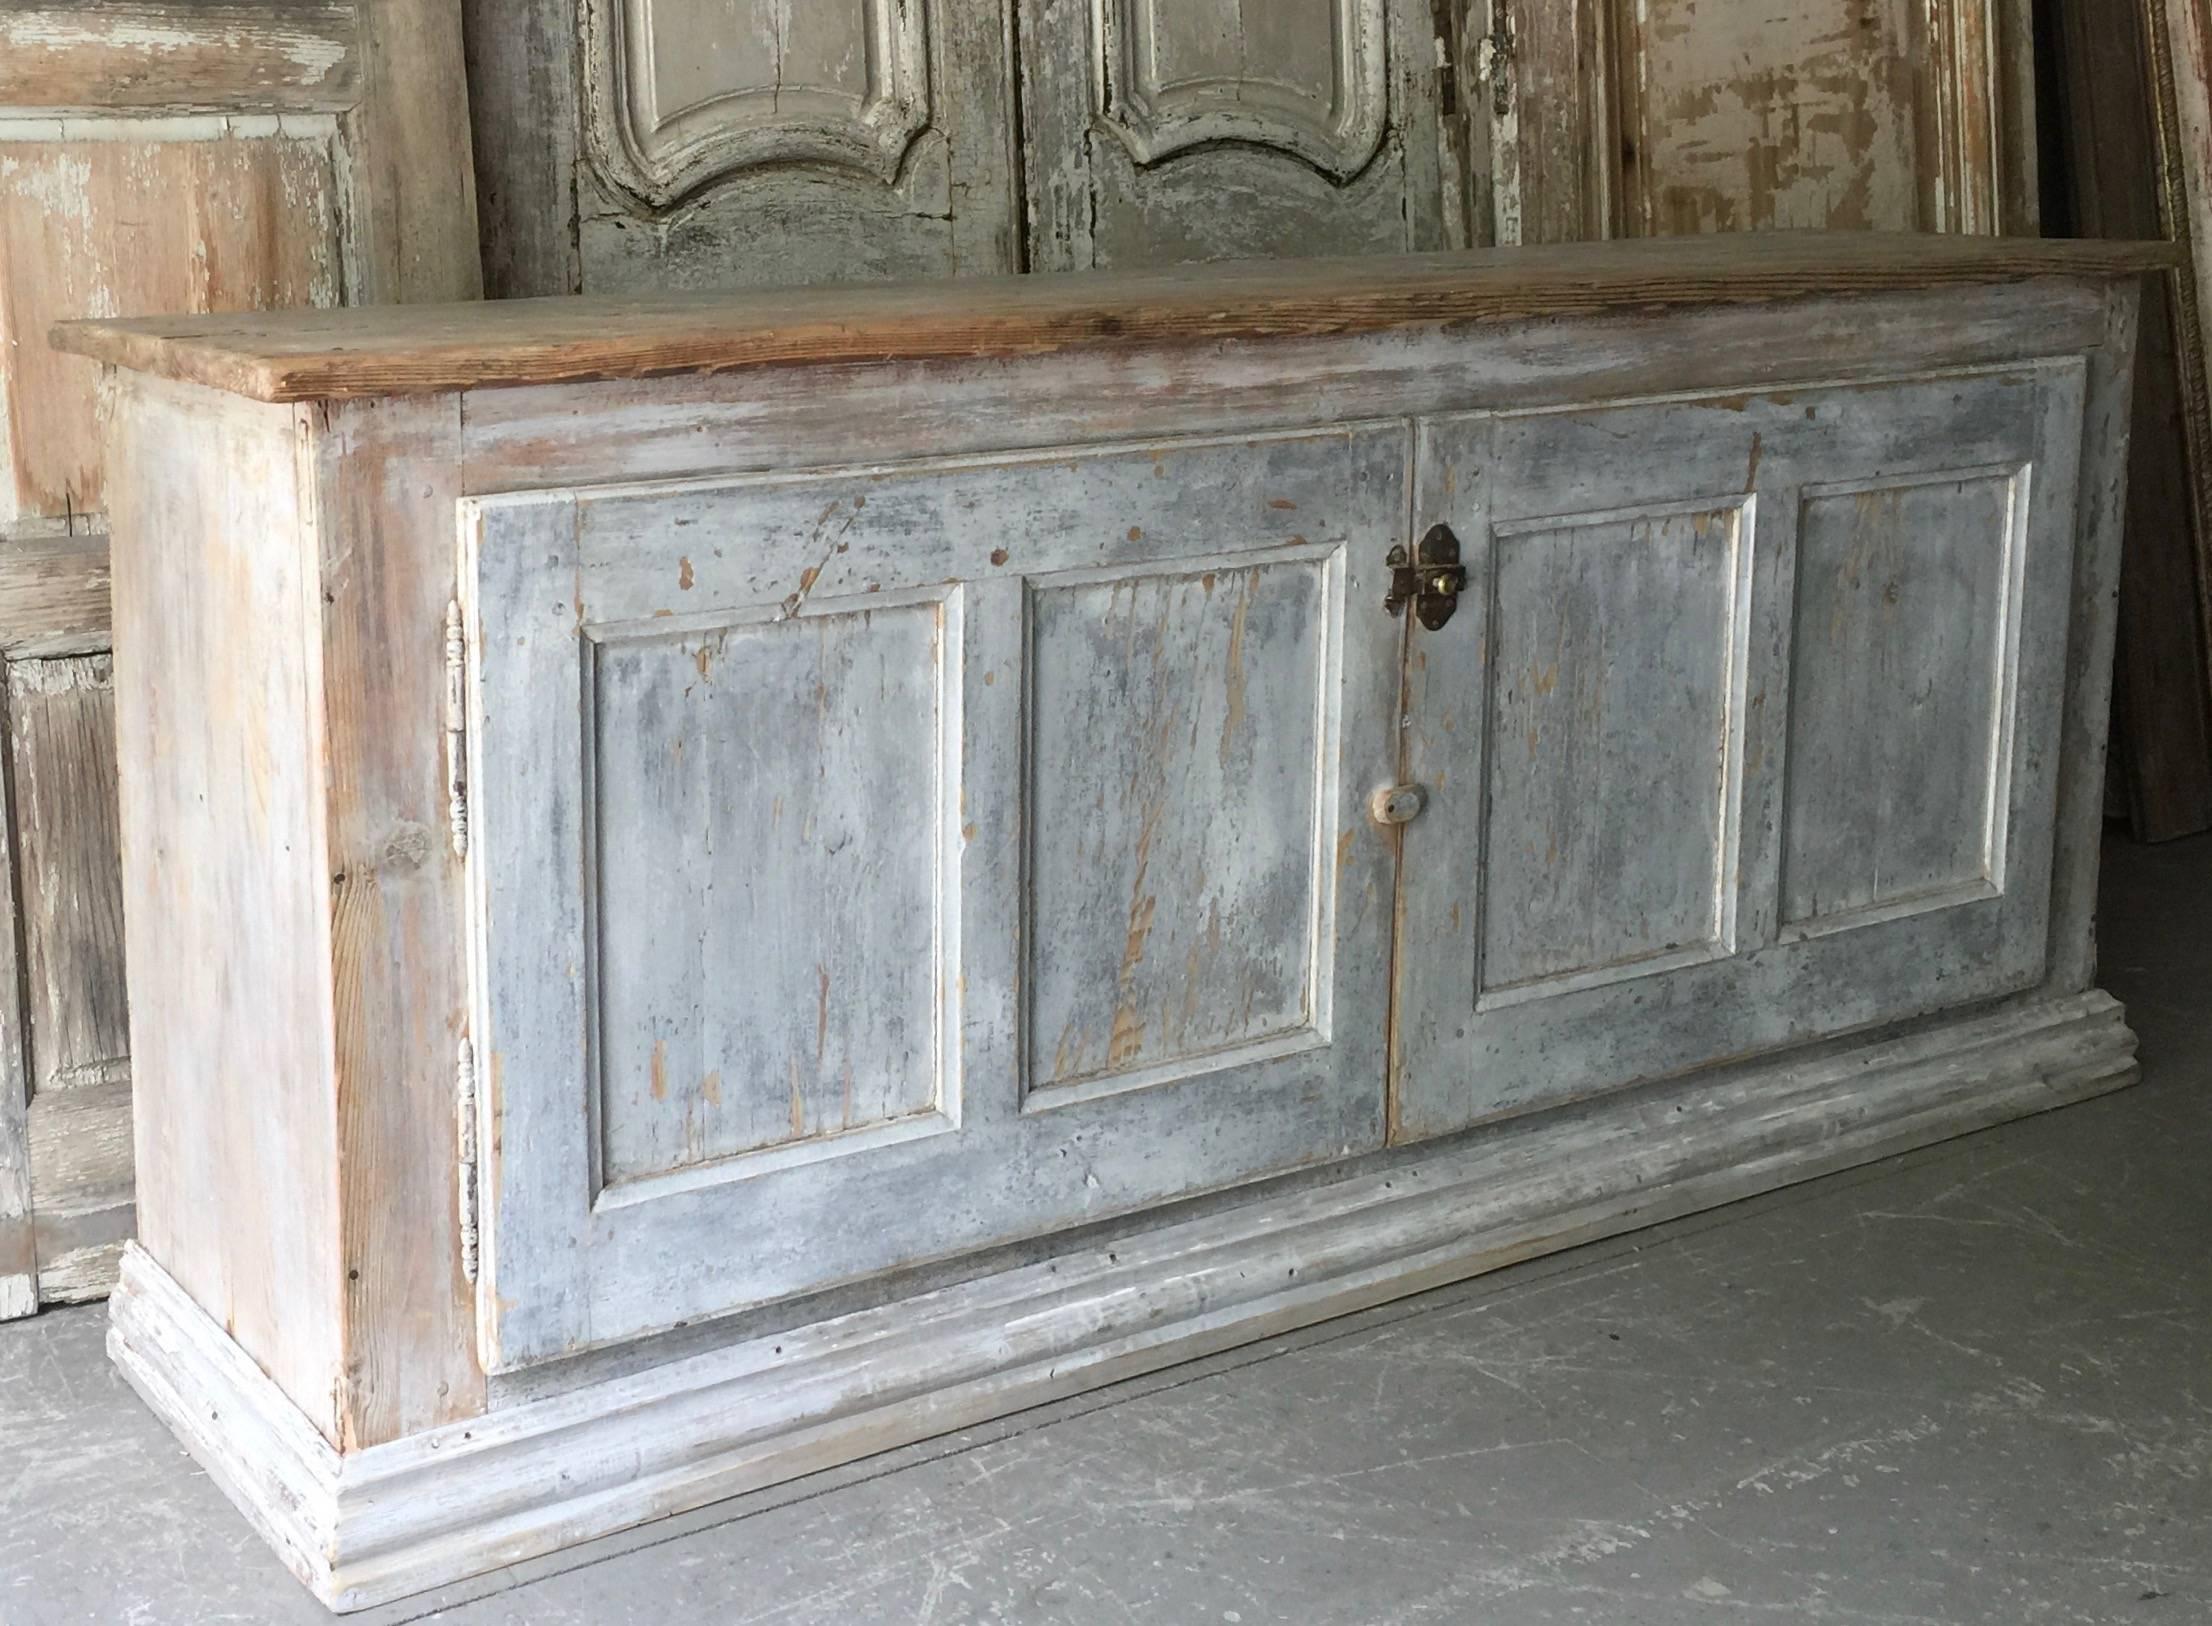 A charming 19th century painted French long sideboard, twol large doors with four panels in most original patina, natural pine top and original hardware.
Simple elegant!
Nouvelle mise à jour!

